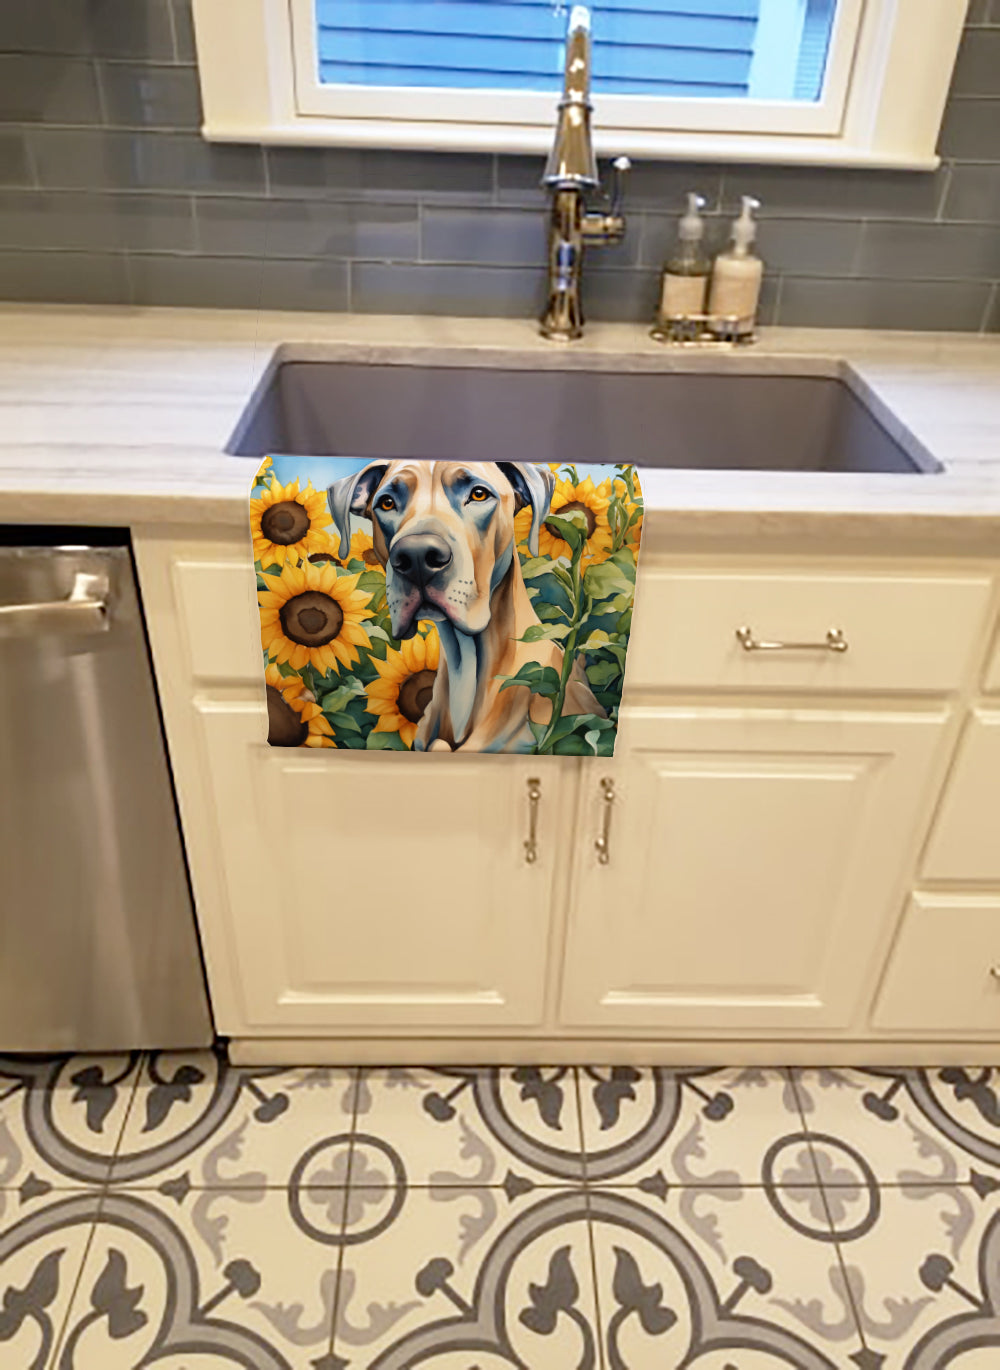 Buy this Great Dane in Sunflowers Kitchen Towel